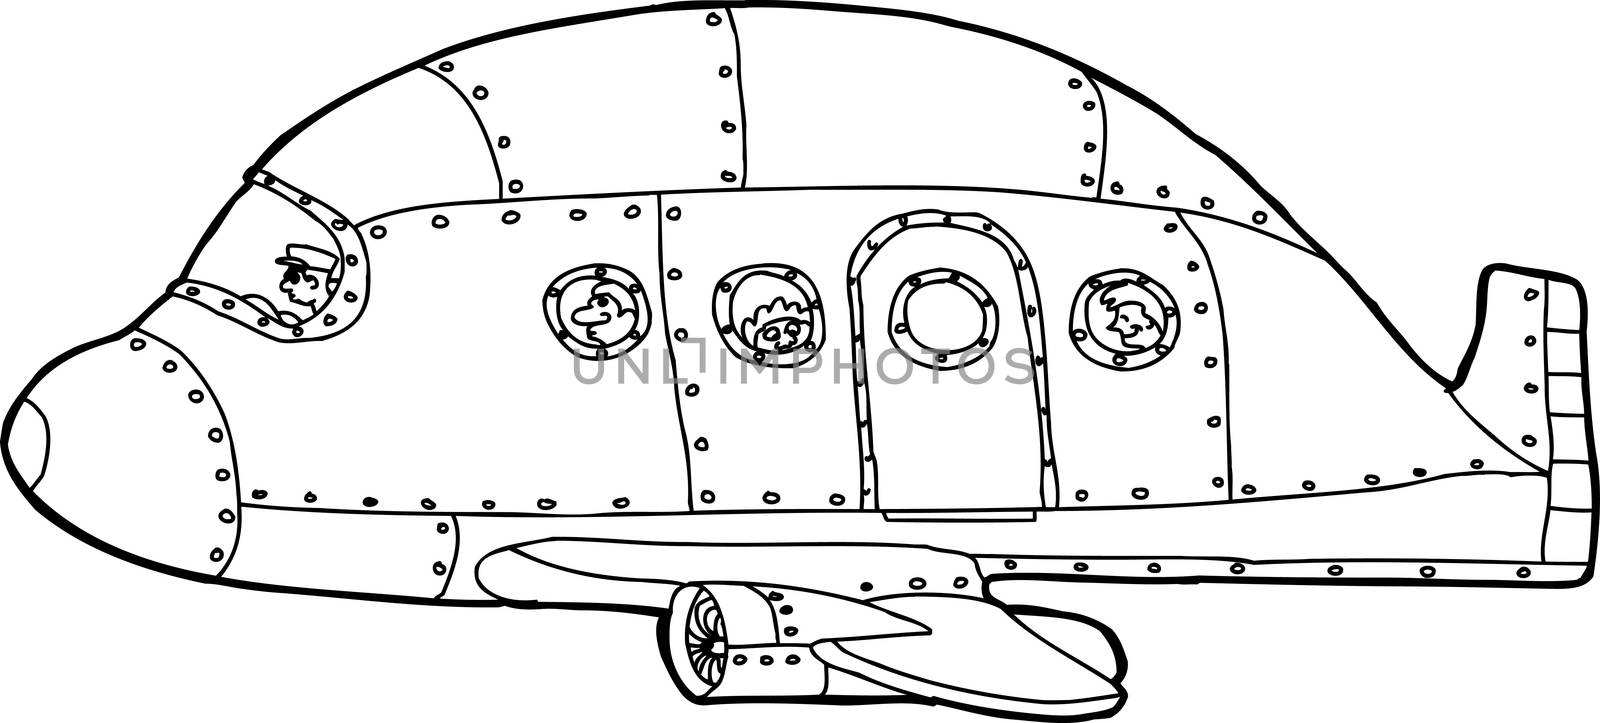 Outlined Passenger Plane by TheBlackRhino